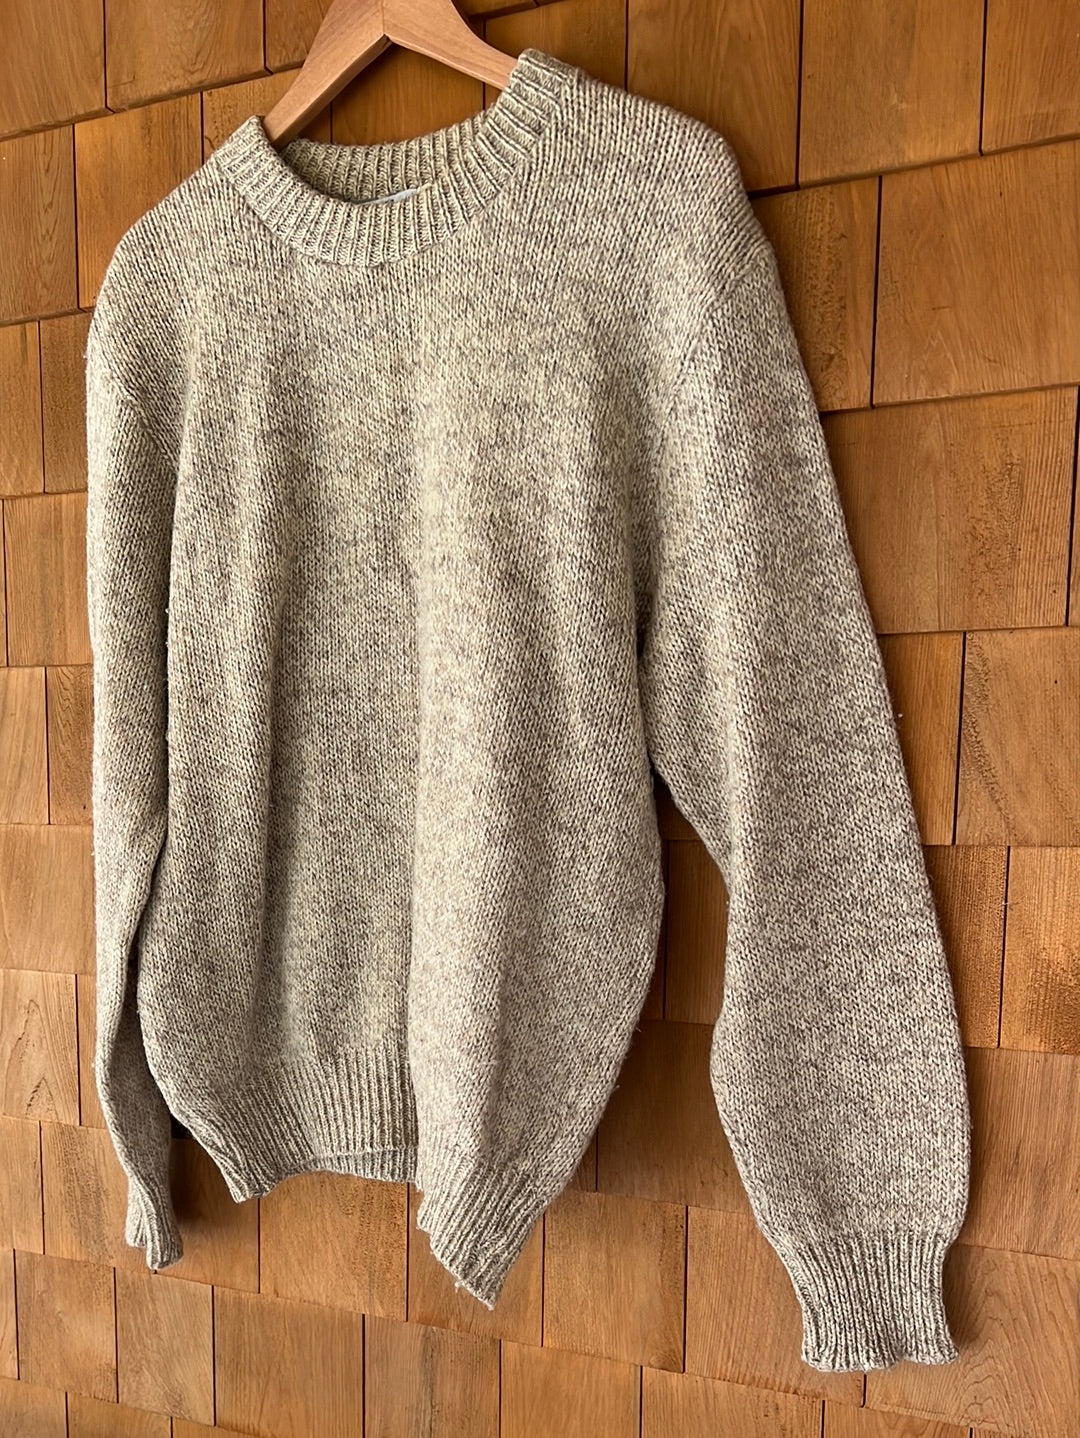 Vintage White Mountain Woolens Wool Sweater - Oatmeal